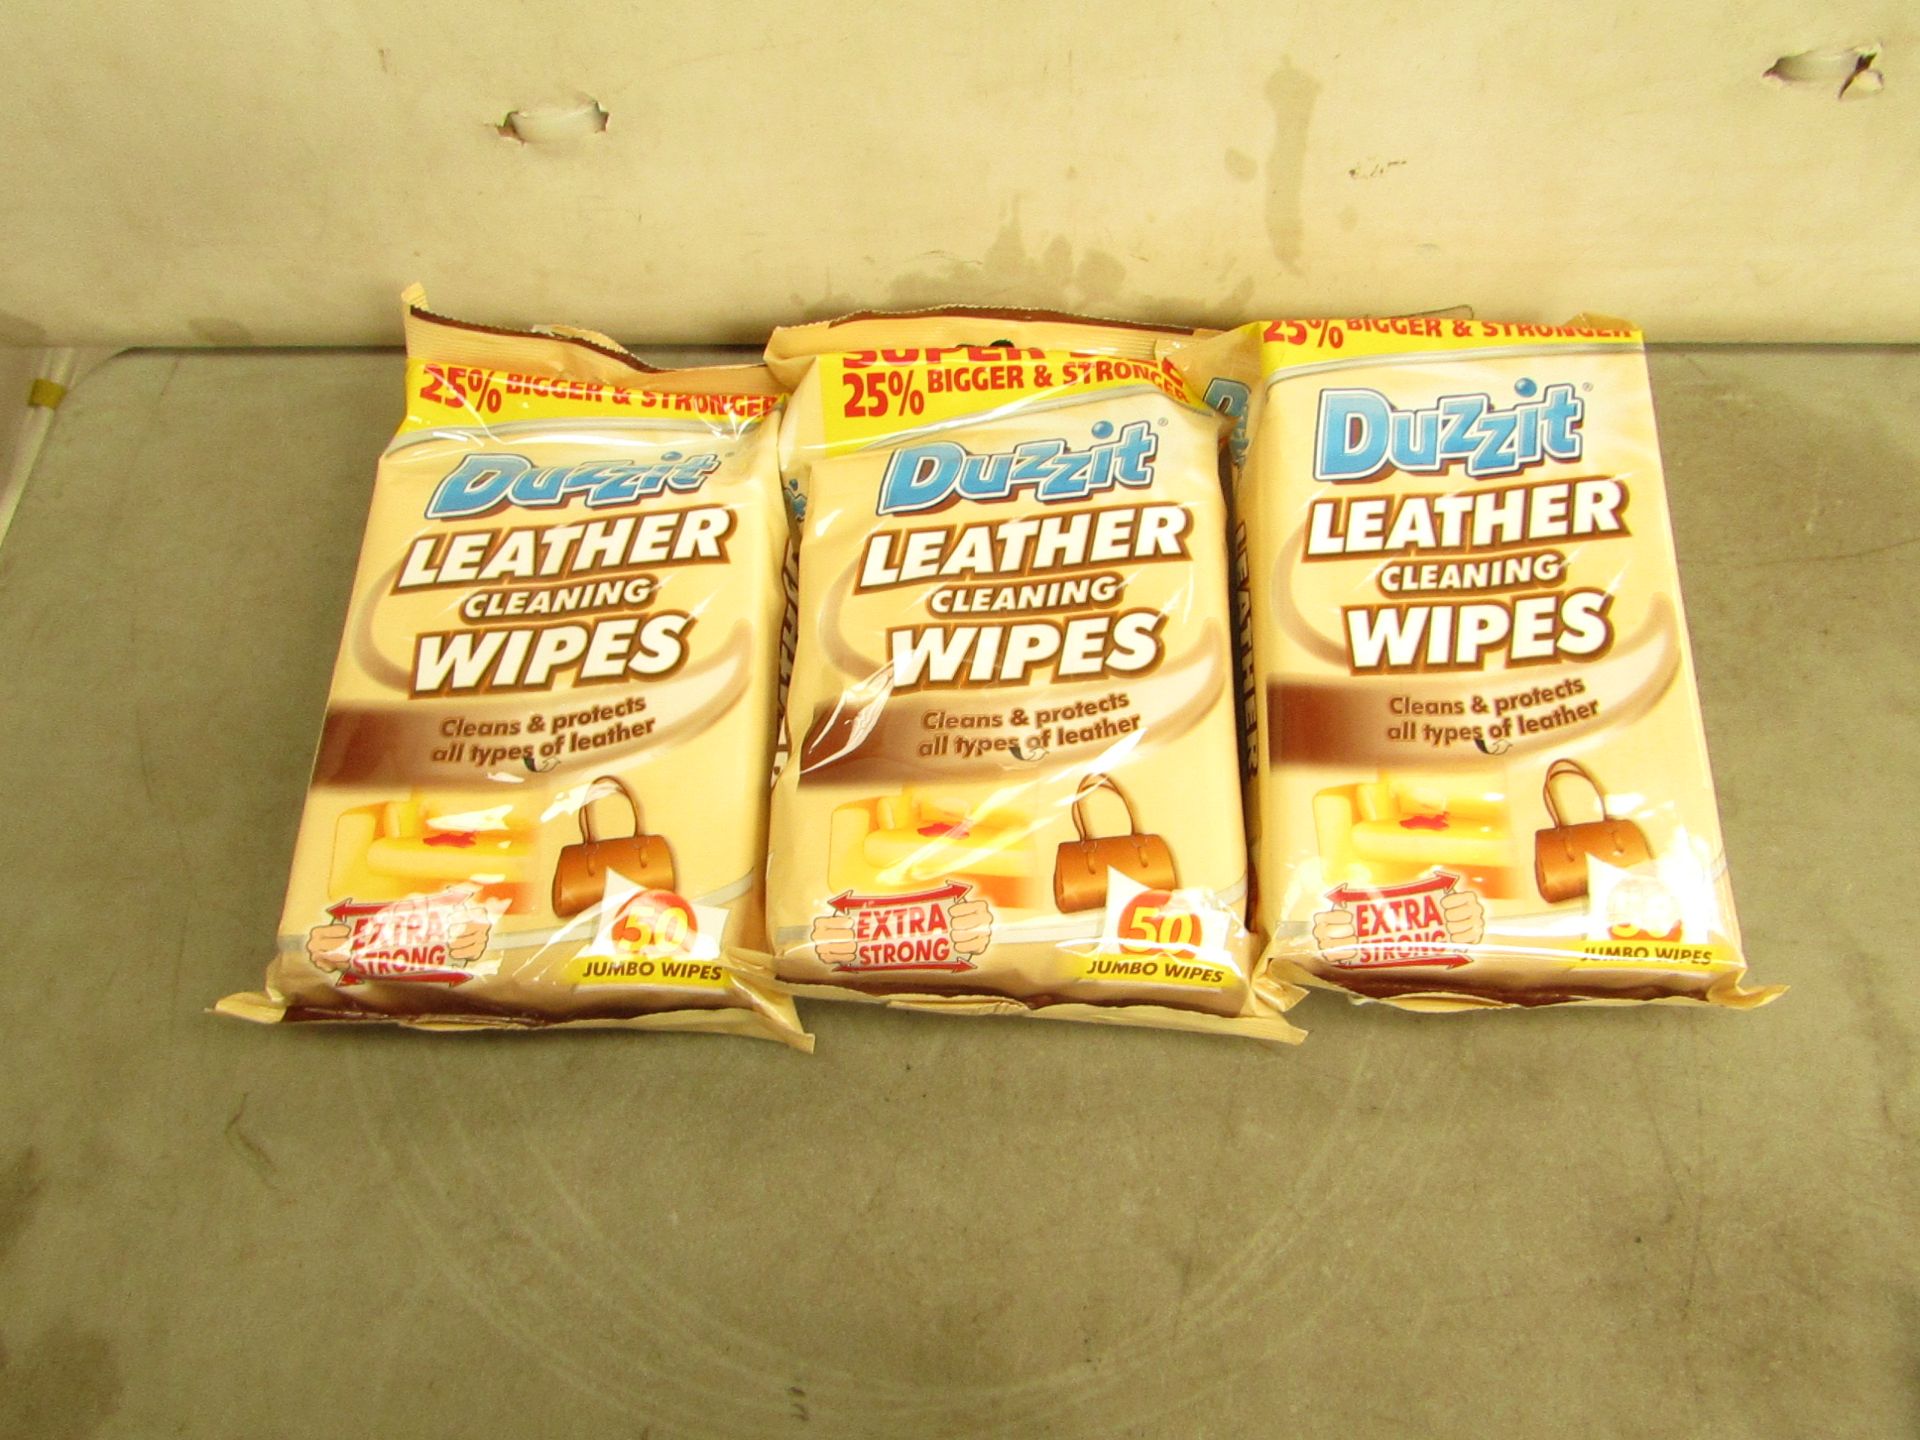 3 Packs of 50 Duzzit Leather Cleaning Wipes - New & Packaged.